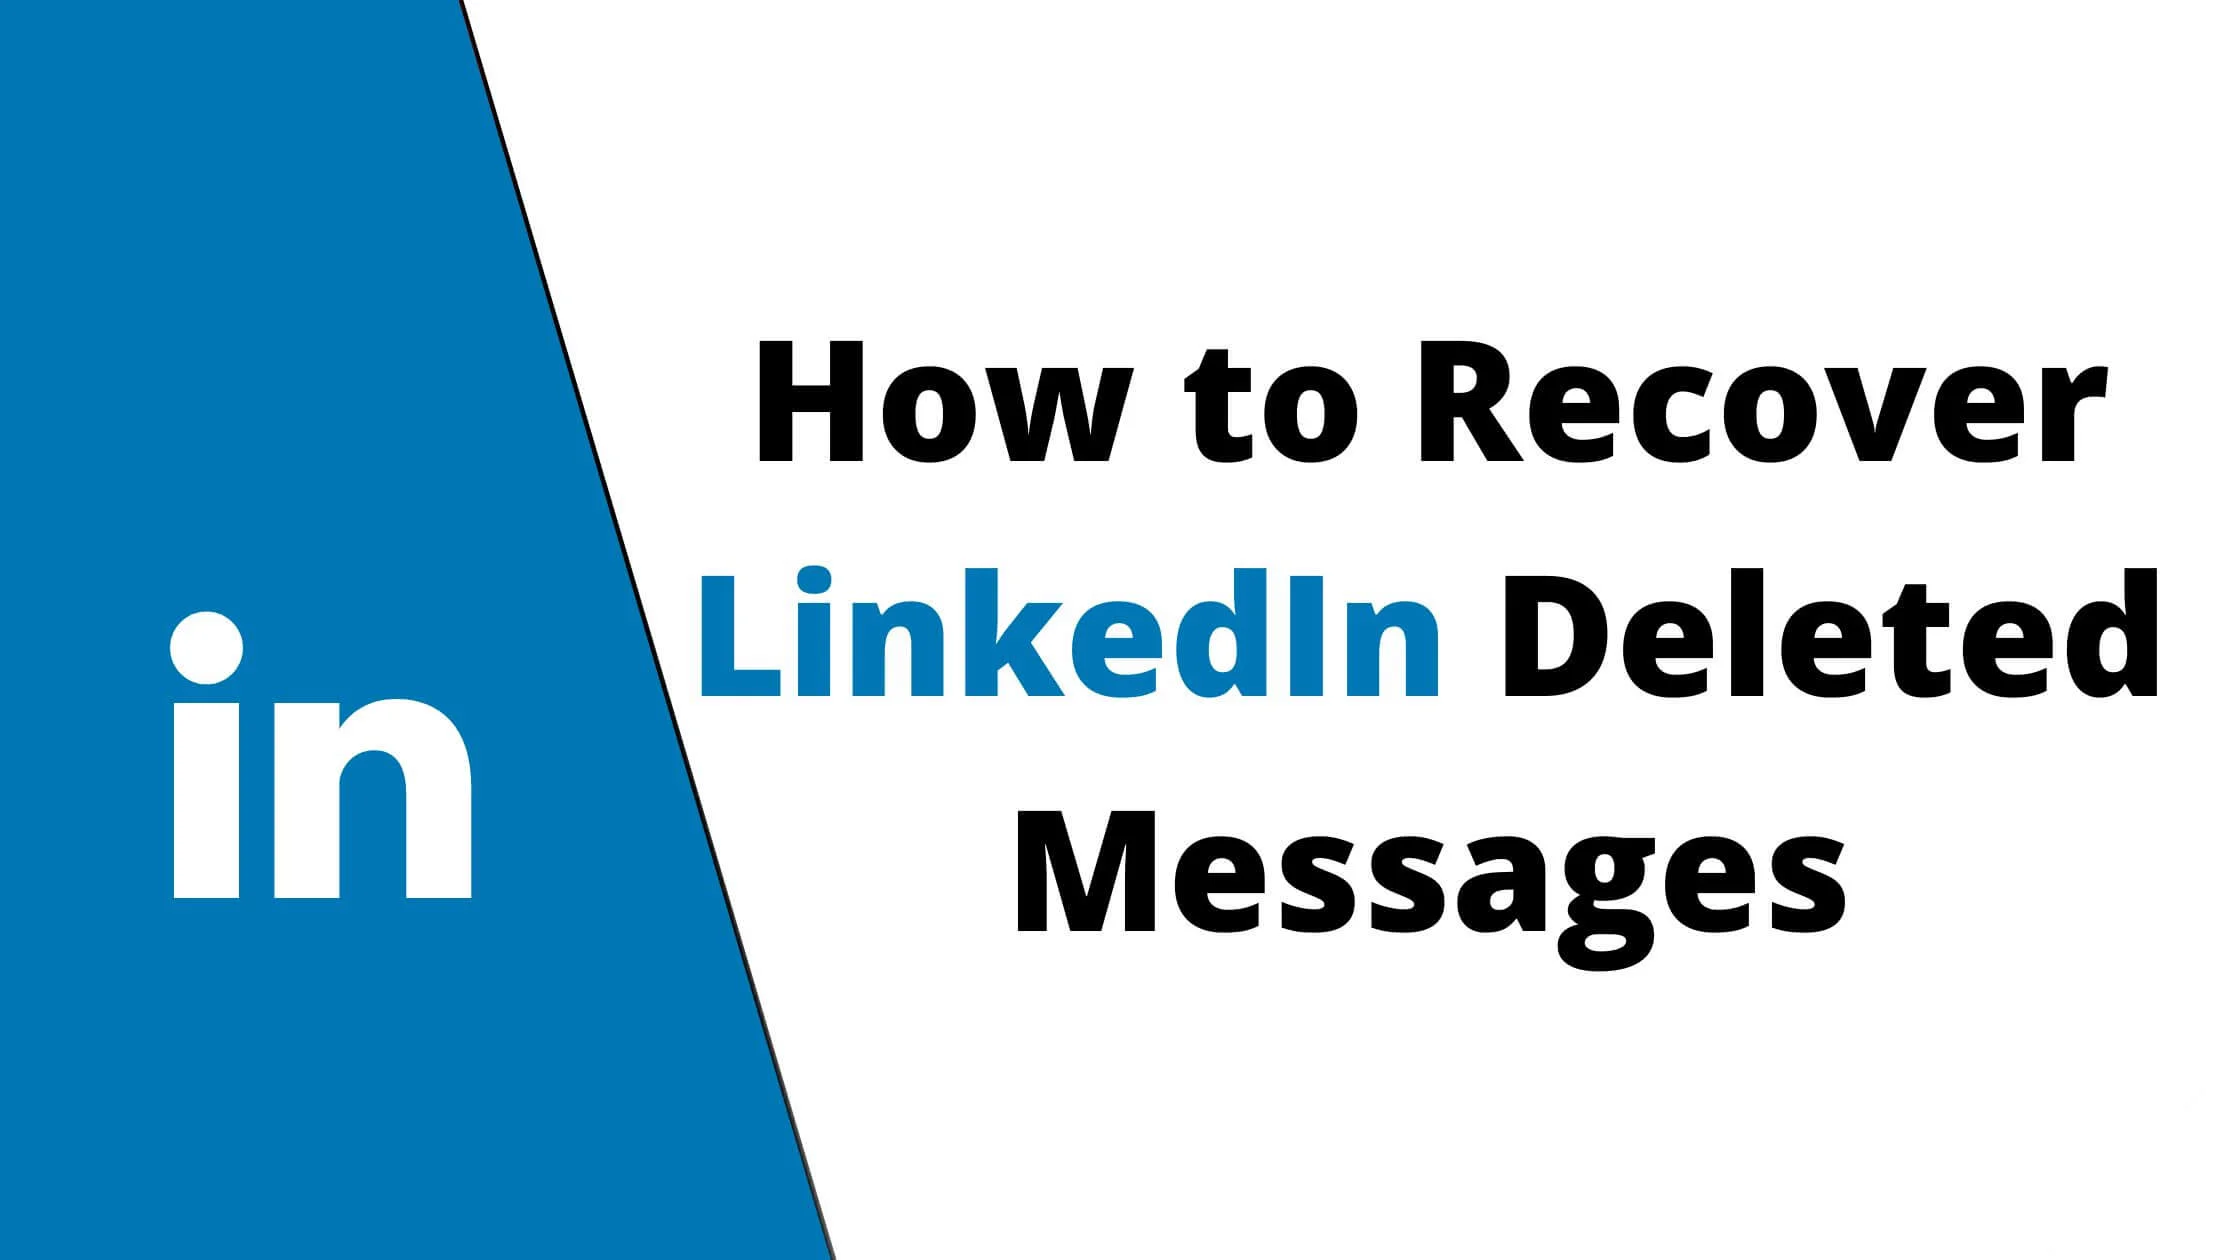 How to Recover LinkedIn Deleted Messages